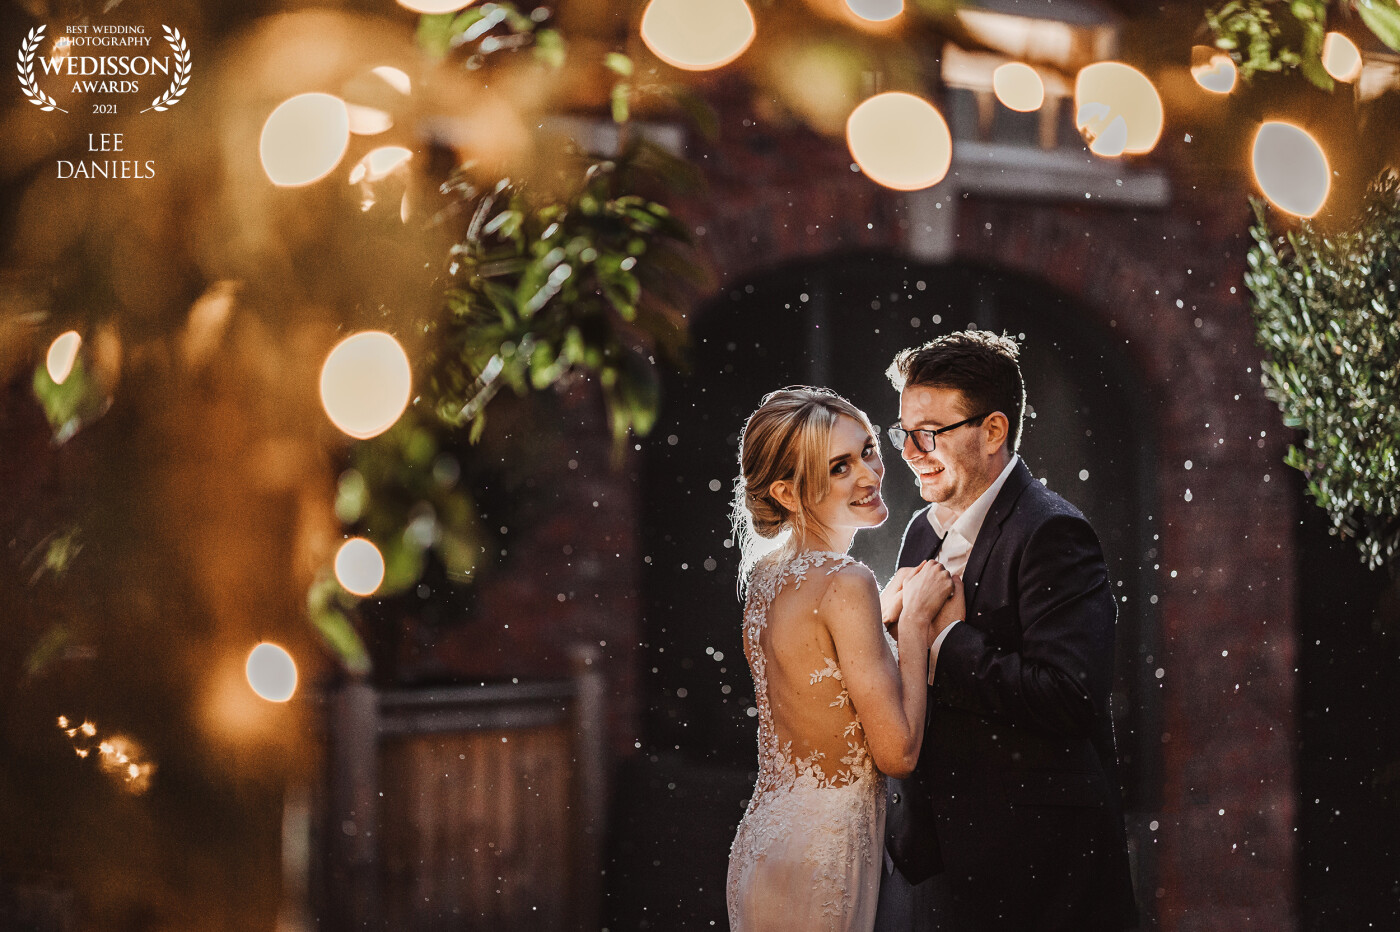 Amazingly Shannon & Oliver hoped for rain in the evening so we could create a portrait like this! I found a nice composition then back lit them from behind to make the rain stand out :)<br />
<br />
VENUE - ELSHAM HALL